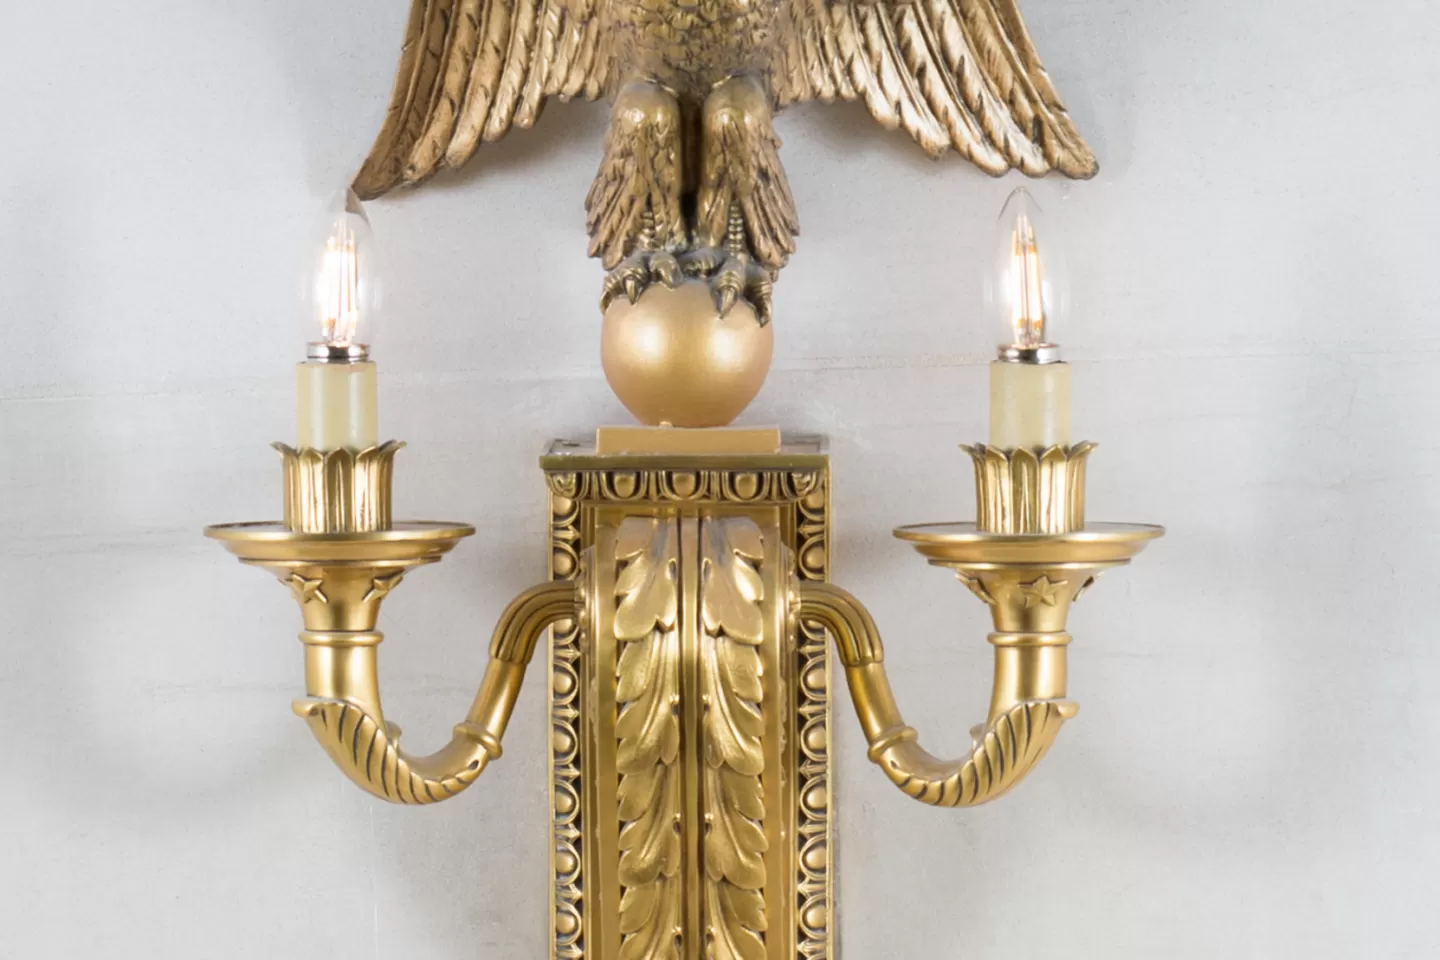 Eagle sconce or wall bracket on staircase walls in the Longworth Building.